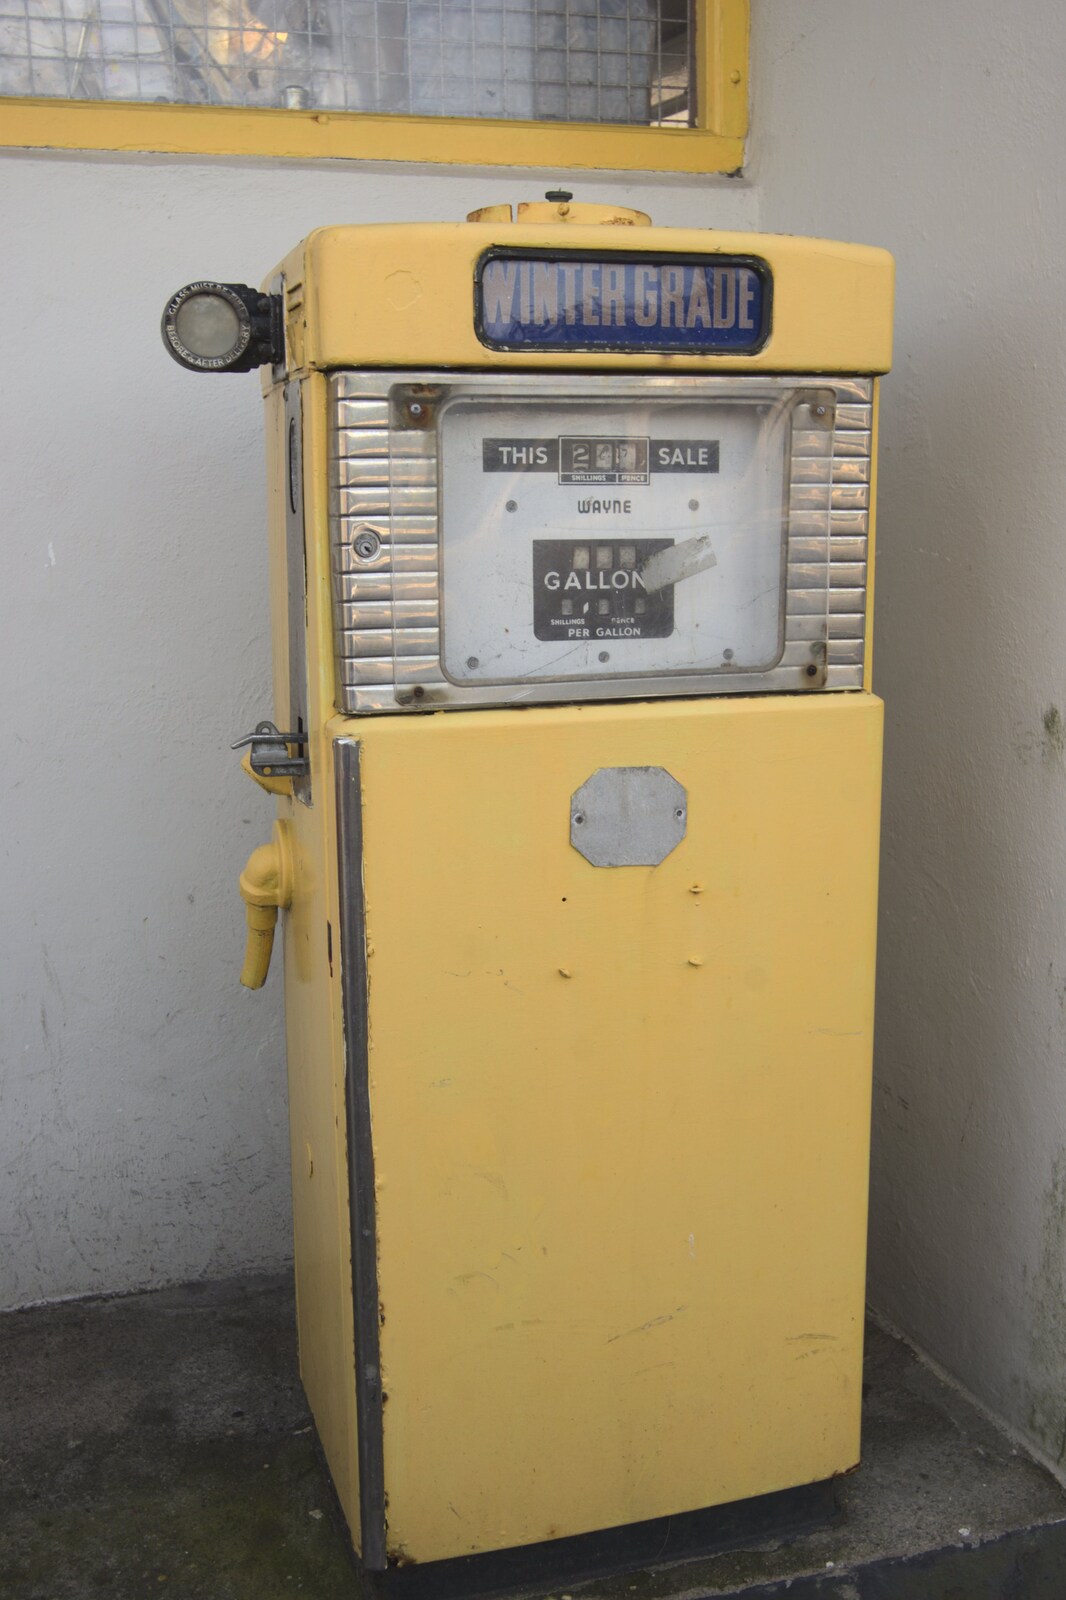 A nice 1950s yellow petrol pump from A Day in Greystones, County Dublin, Ireland - 28th February 2010